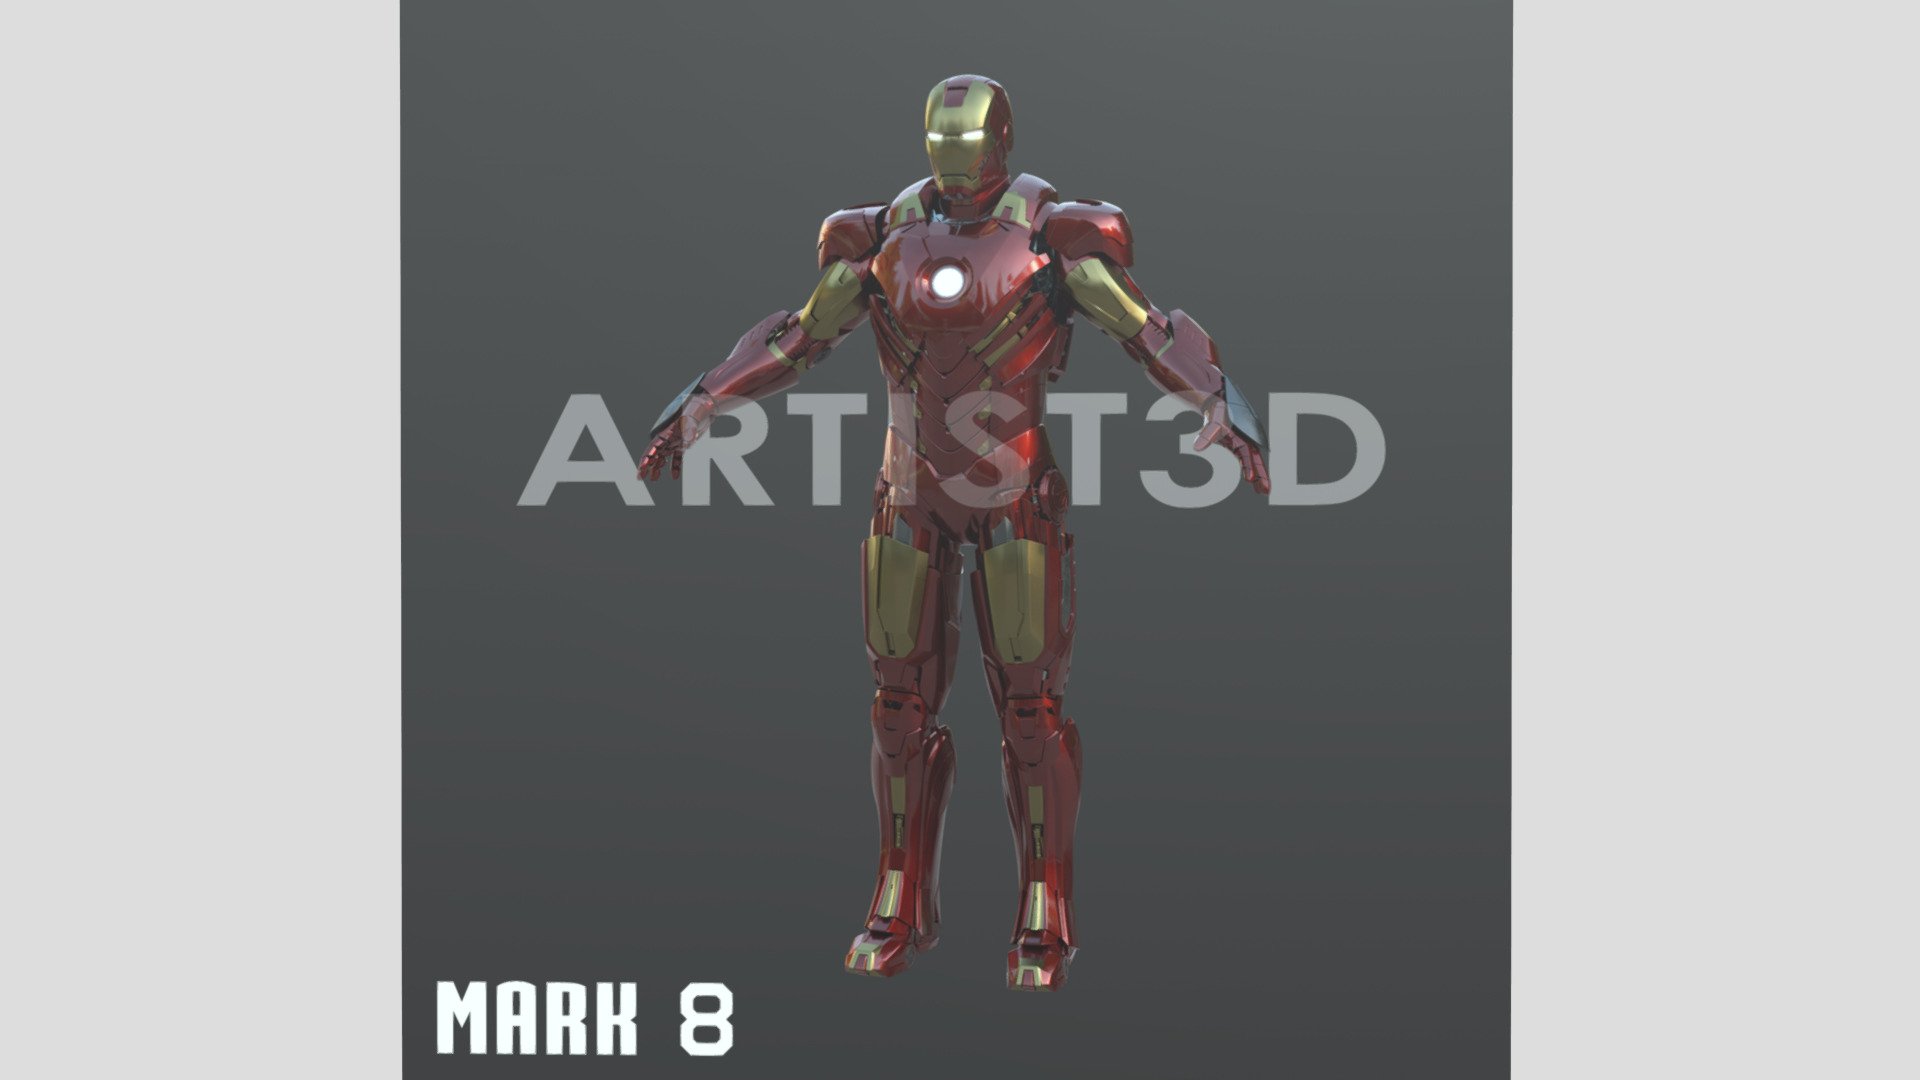 Iron Man Mark 8

Full-size armor for 3d printing (wearable). In the preview window, a “cube” with images of the Iron Man suit is provided as a demonstration. This prevents the model from being stolen from this site. At the link you can find full details on purchasing this suit.



Download link for Mark 8 armor suit:

https://www.patreon.com/posts/iron-man-mark-8-85566759

https://cults3d.com/en/3d-model/fashion/iron-man-mark-8-cosplay-full-suit
 - Iron Man Mark 8 Cosplay Full-size Suit - 3D model by ARTIST 3D (@artist_3d) 3d model